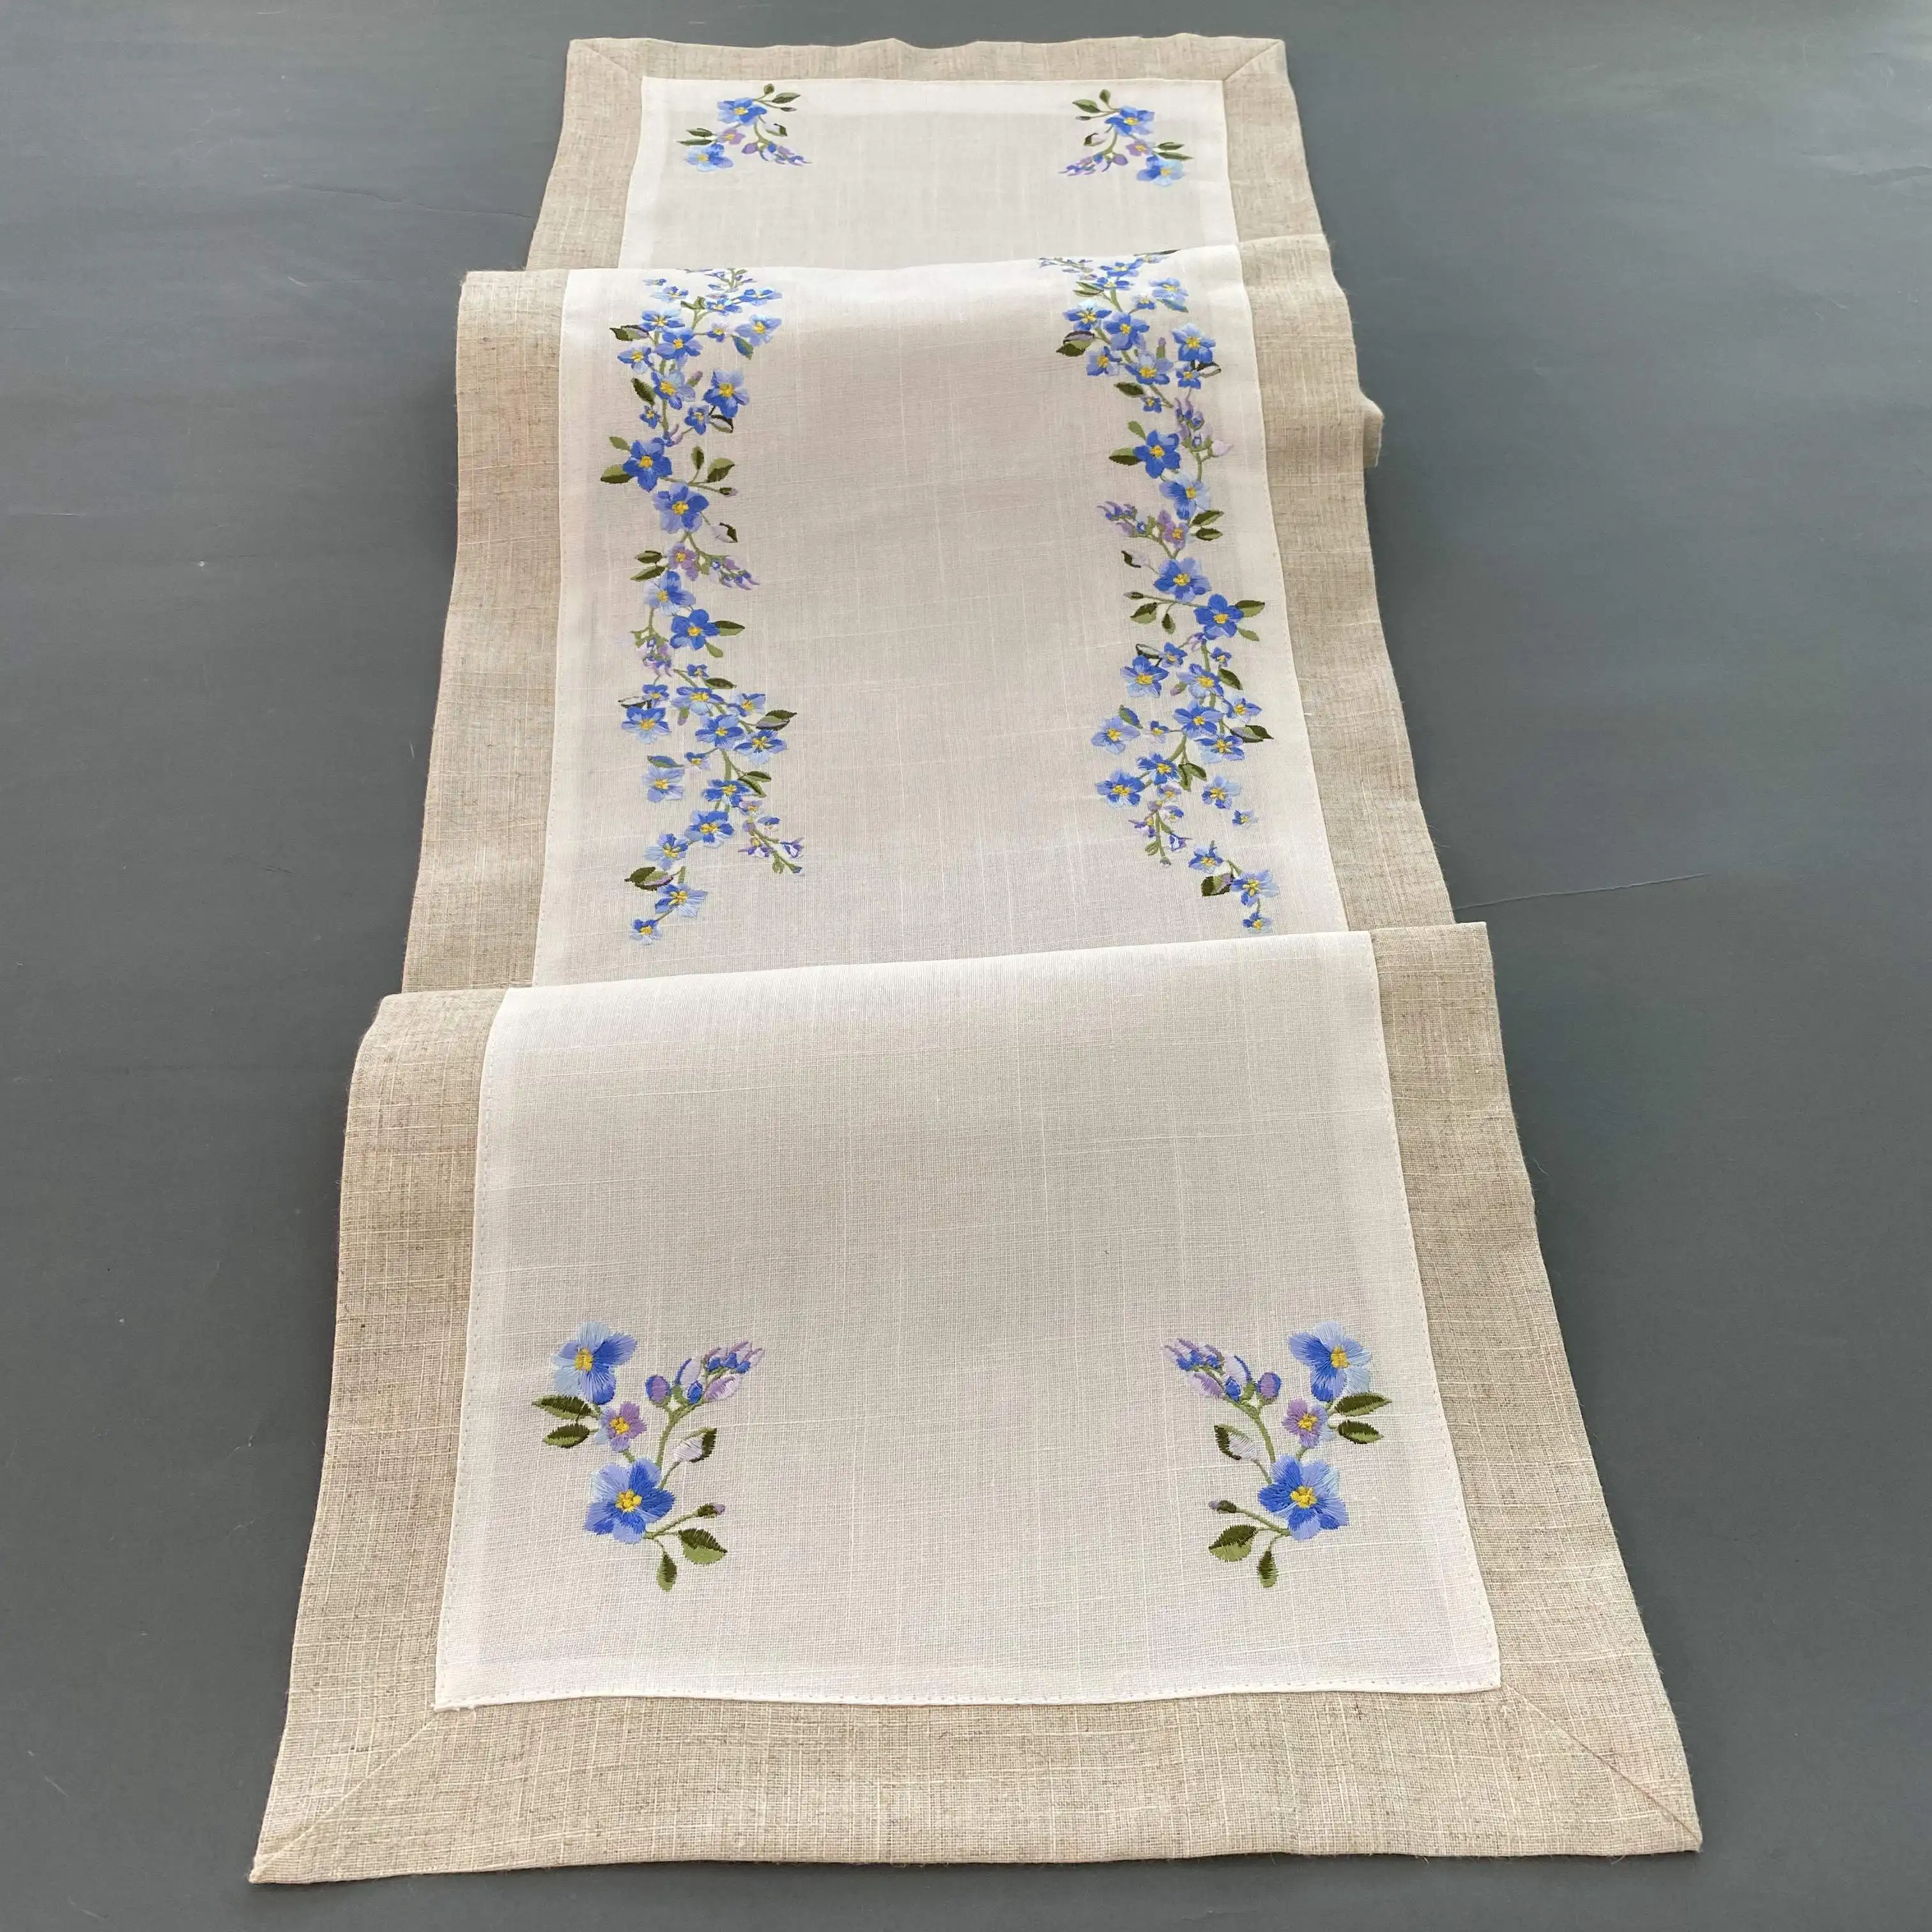 Tablecloth Tablecloth Double Layer Embroidered Table Runner Tablecloth Table Cover Table Cloth